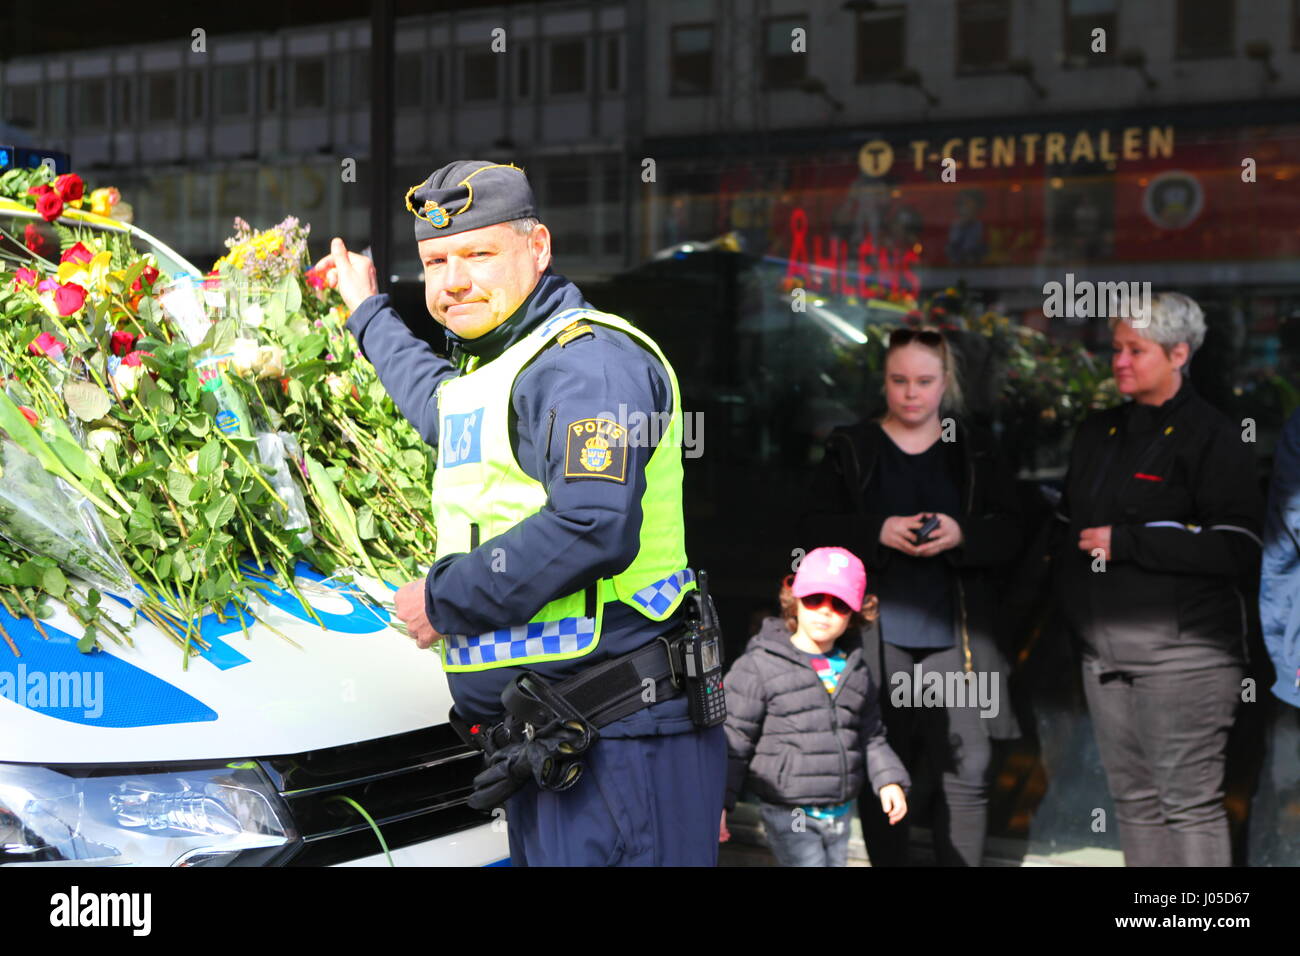 Emotional scenes at the site of the Stockholm Truck Attack. People have come to lay flowers on a police car on the Sunday after the attack. Stock Photo